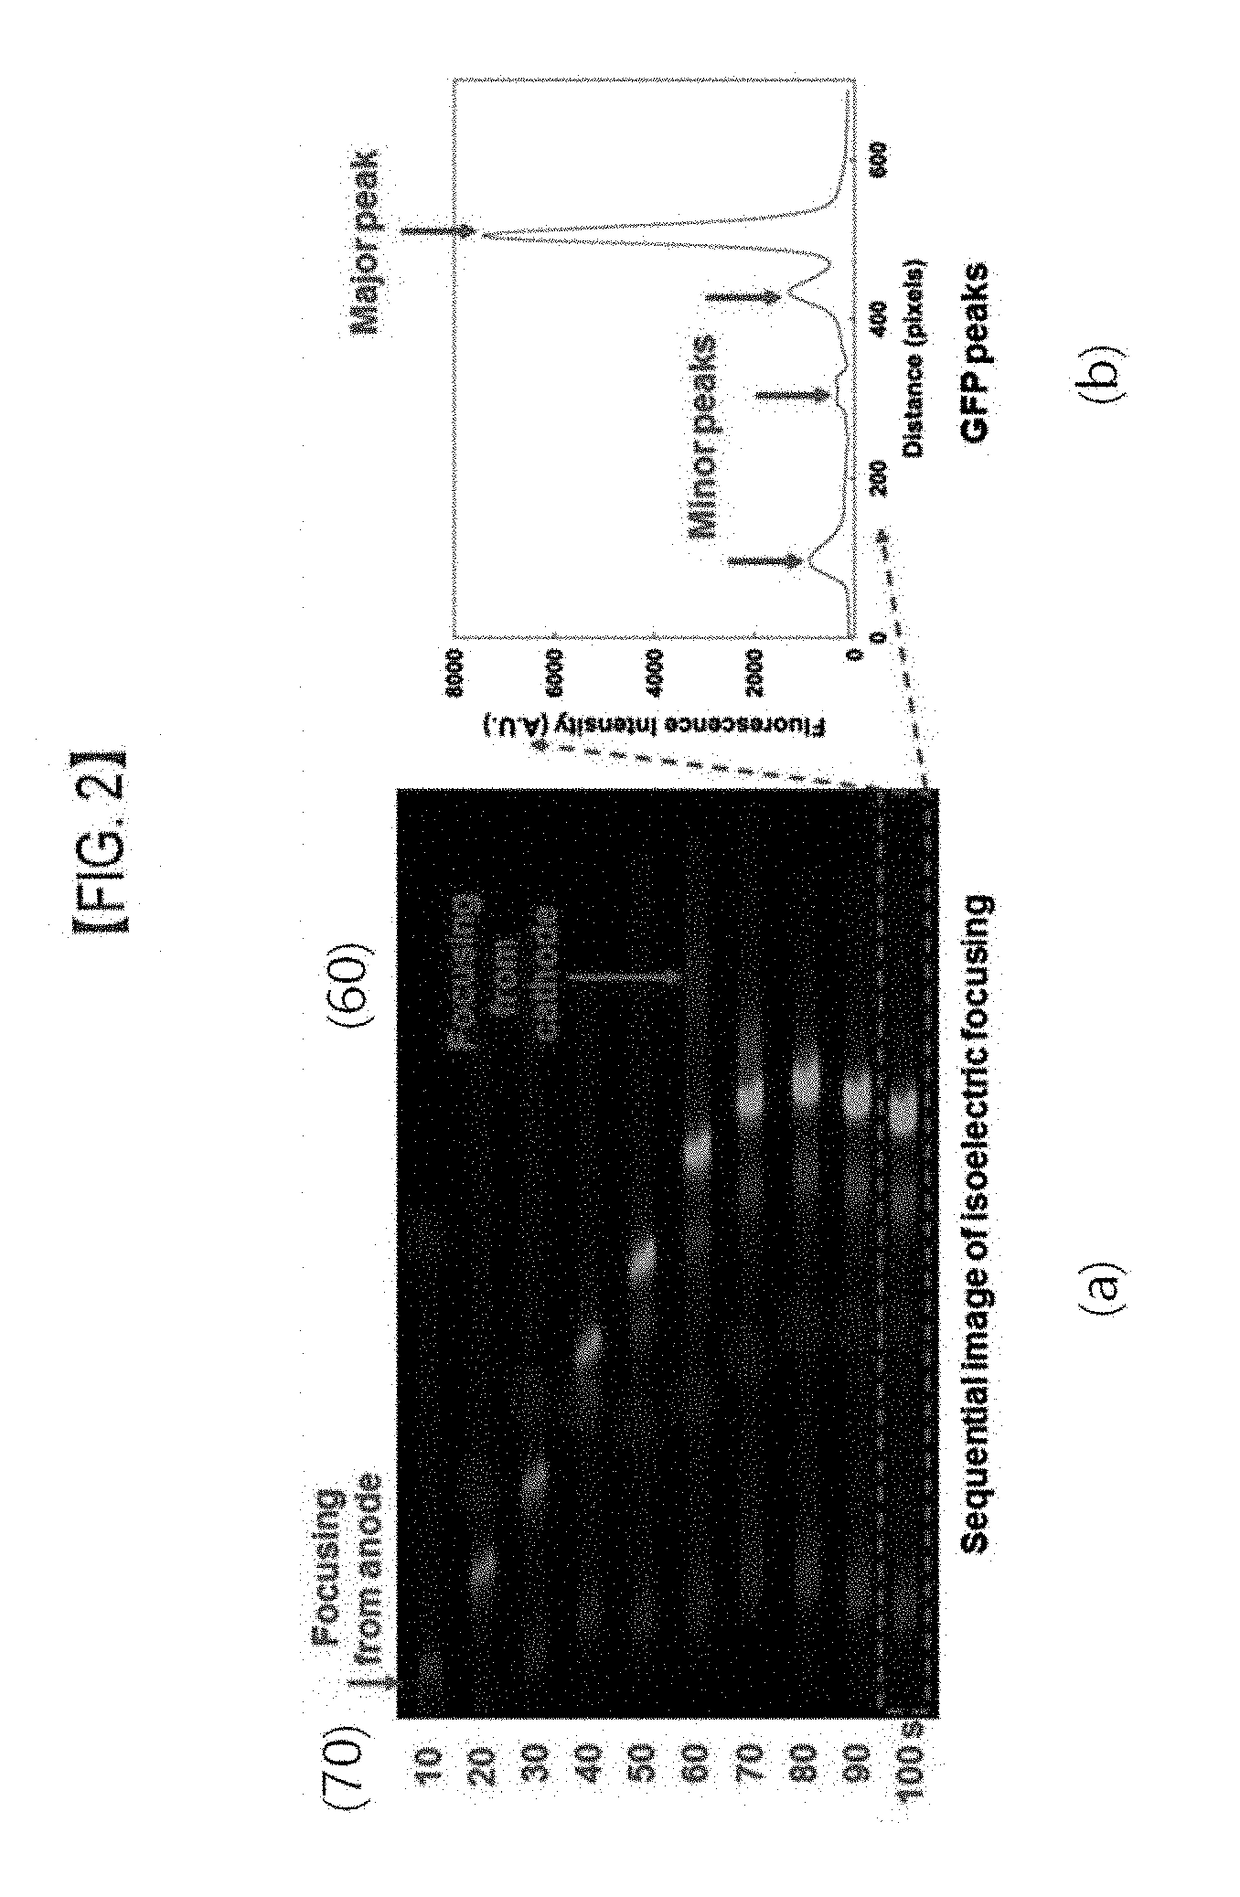 Nonvolatile protein memory system with optical write/erase and electrical readout capability